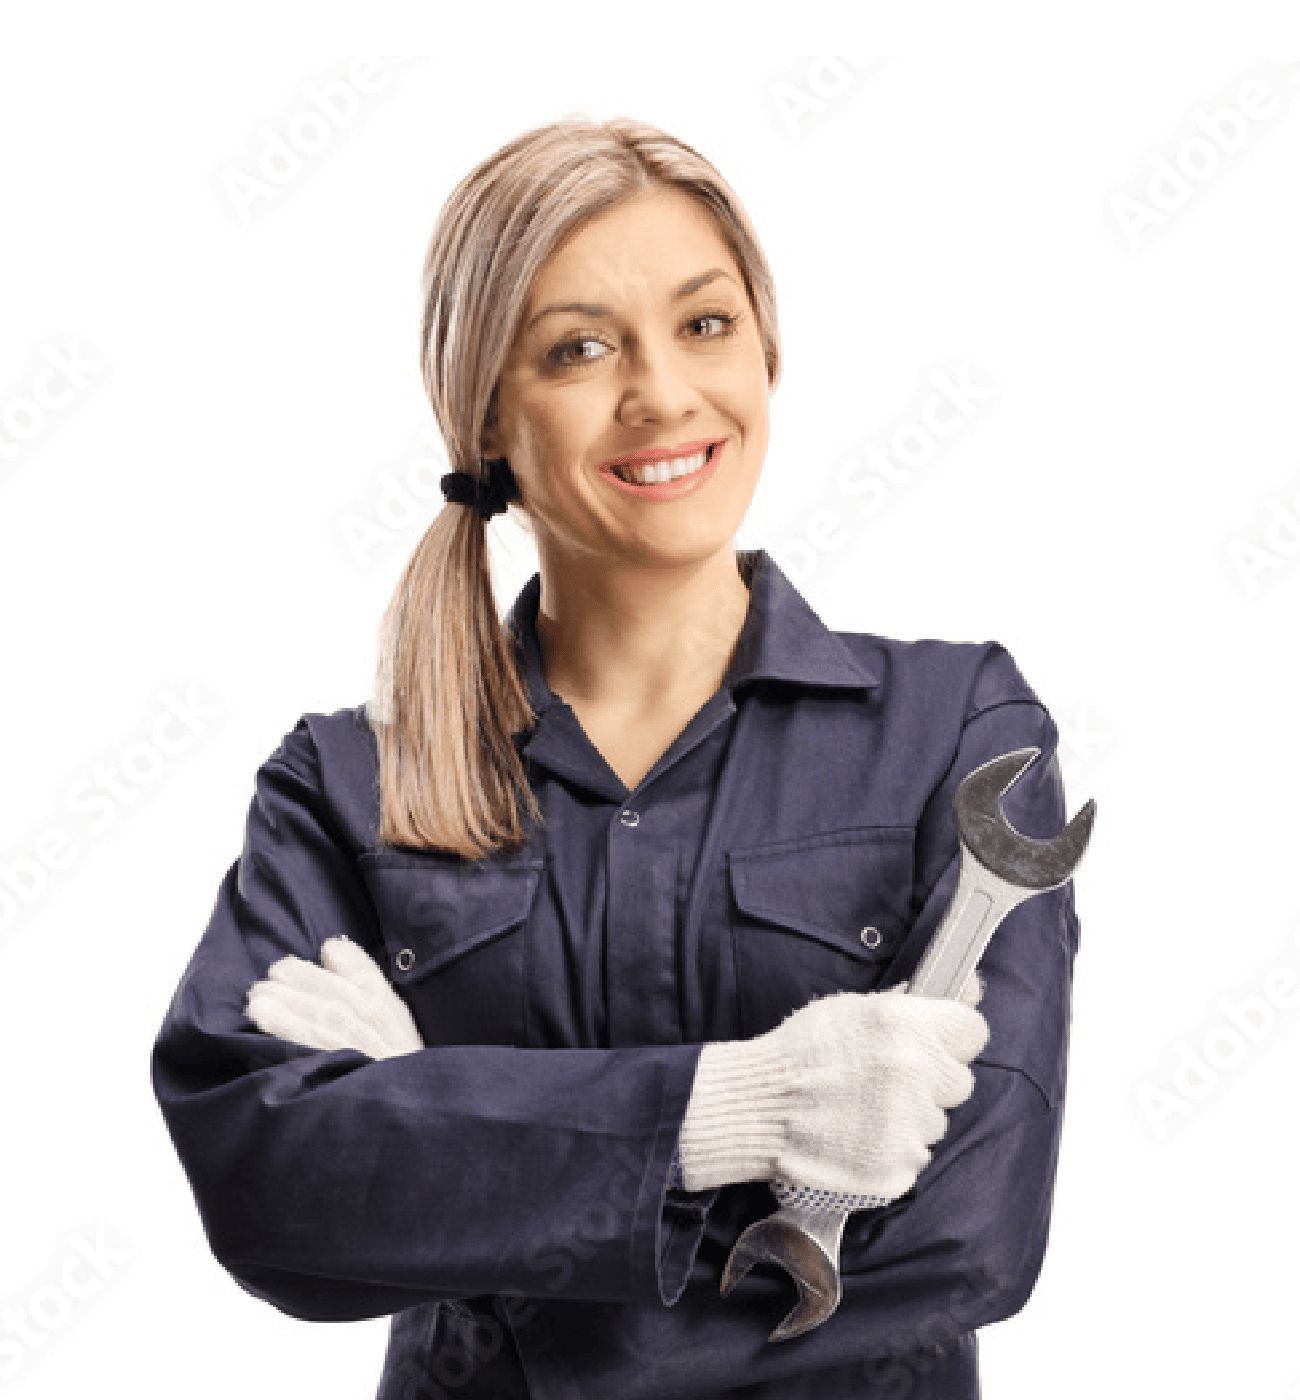 Image of a female mechanic holding a wrench.